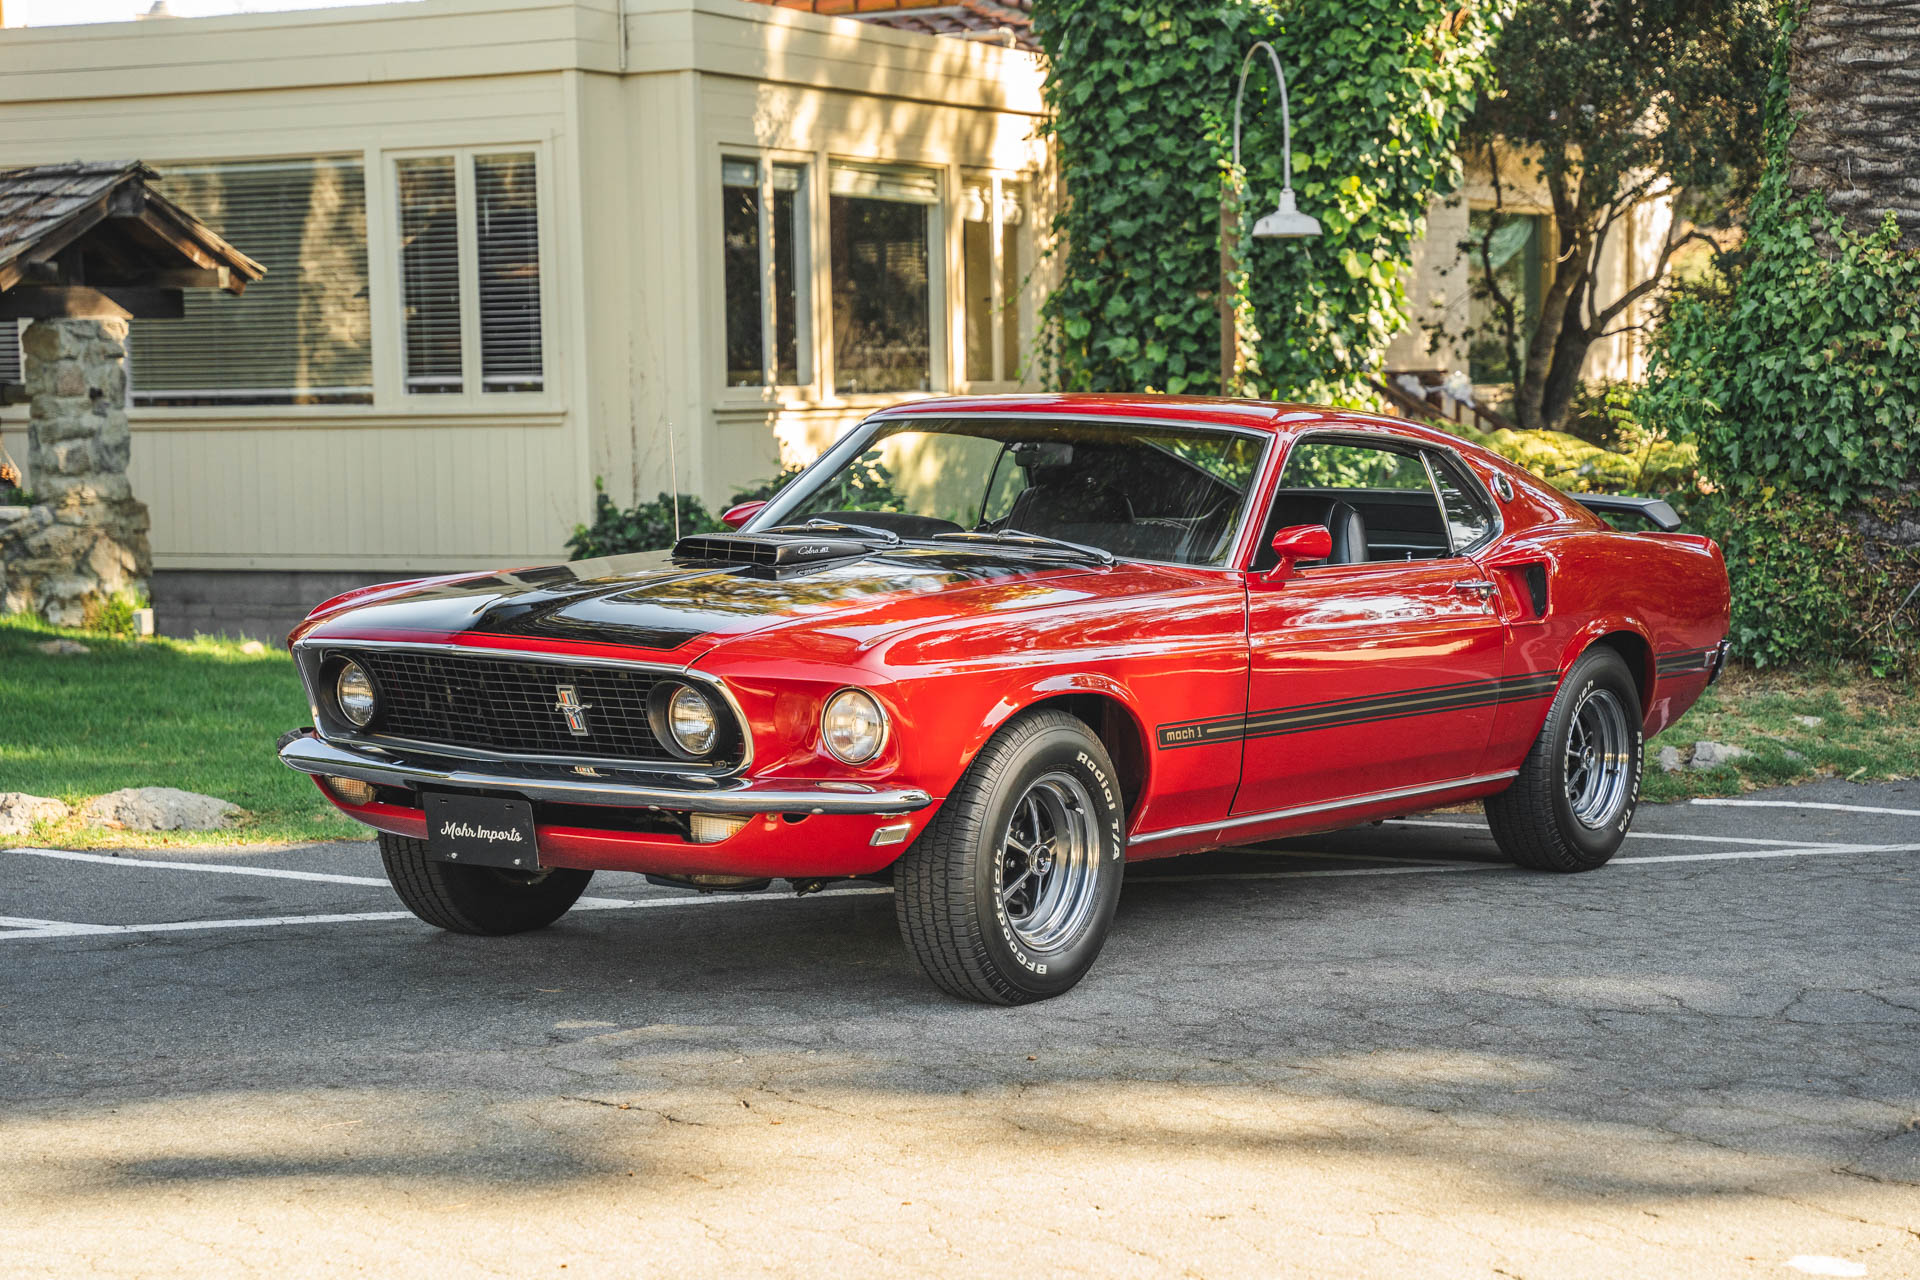 Classic Muscle: 1969 Ford Mustang Mach 1 428 Cobra Jet